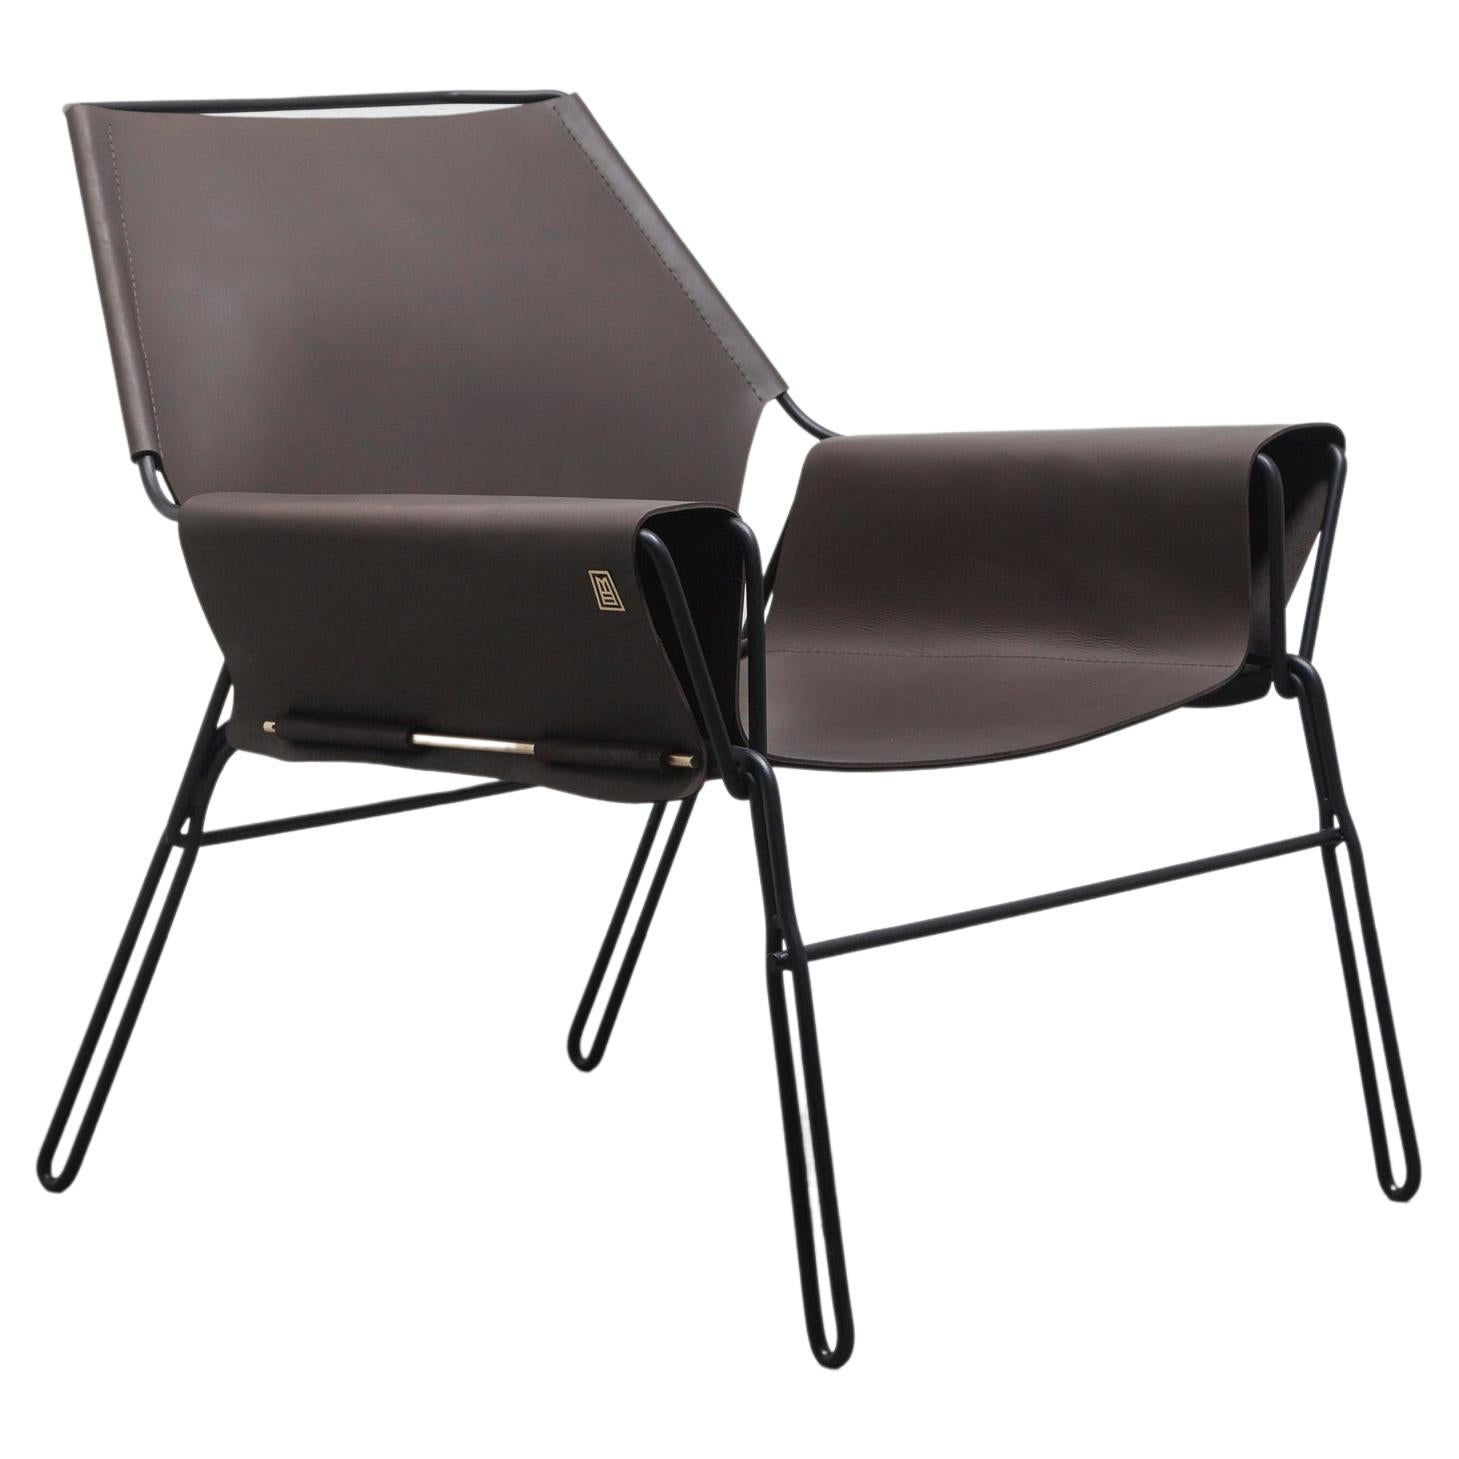 Perfidia_02 Lounge Chair Brown by ANDEAN, Represented by Tuleste Factory For Sale